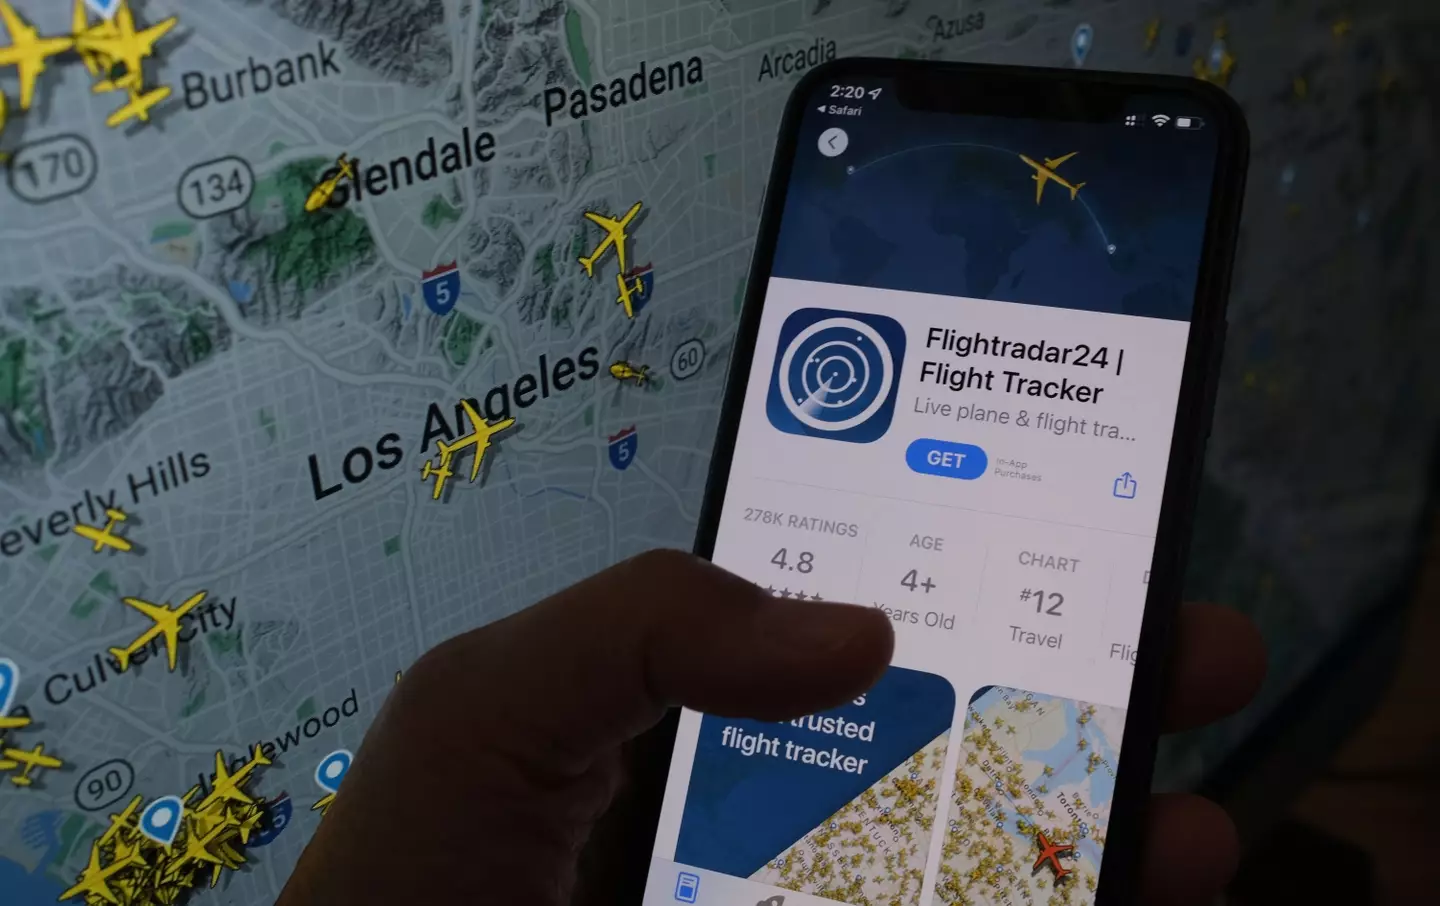 You can set up notifications on the FlightRadar24 app to ping you when there's an emergency.